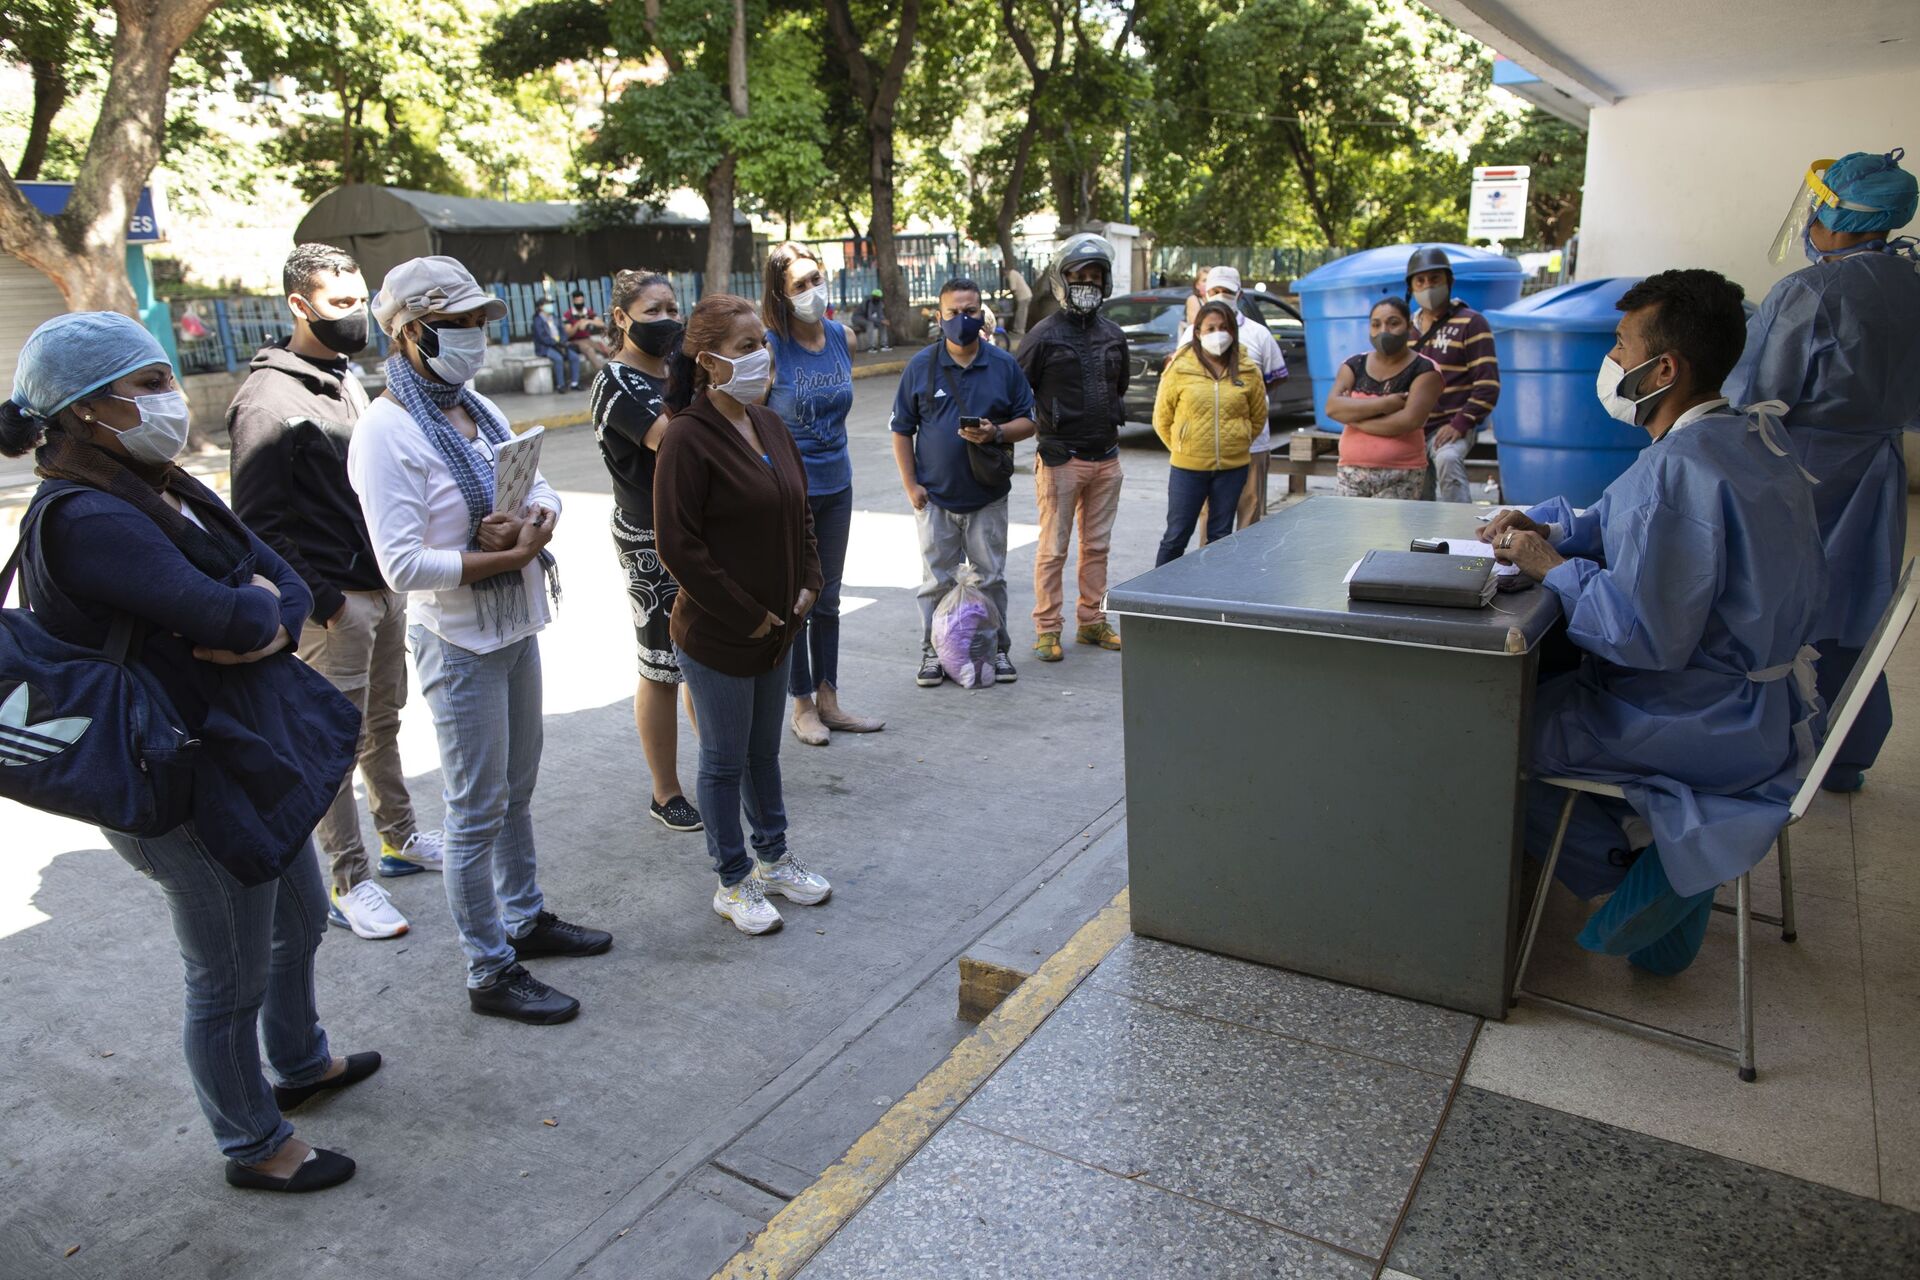 Dr. Wilfredo Sifontes, right, speaks to families who have family hospitalized in the COVID-19 wing, outside José Gregorio Hernández Hospital in the Catia neighborhood of Caracas, Venezuela, Friday, Sept 4, 2020. Sifontes, who oversees the hospital’s emergency services including its coronavirus wing, described having a fever, cough and feeling sick - Sputnik International, 1920, 08.10.2021